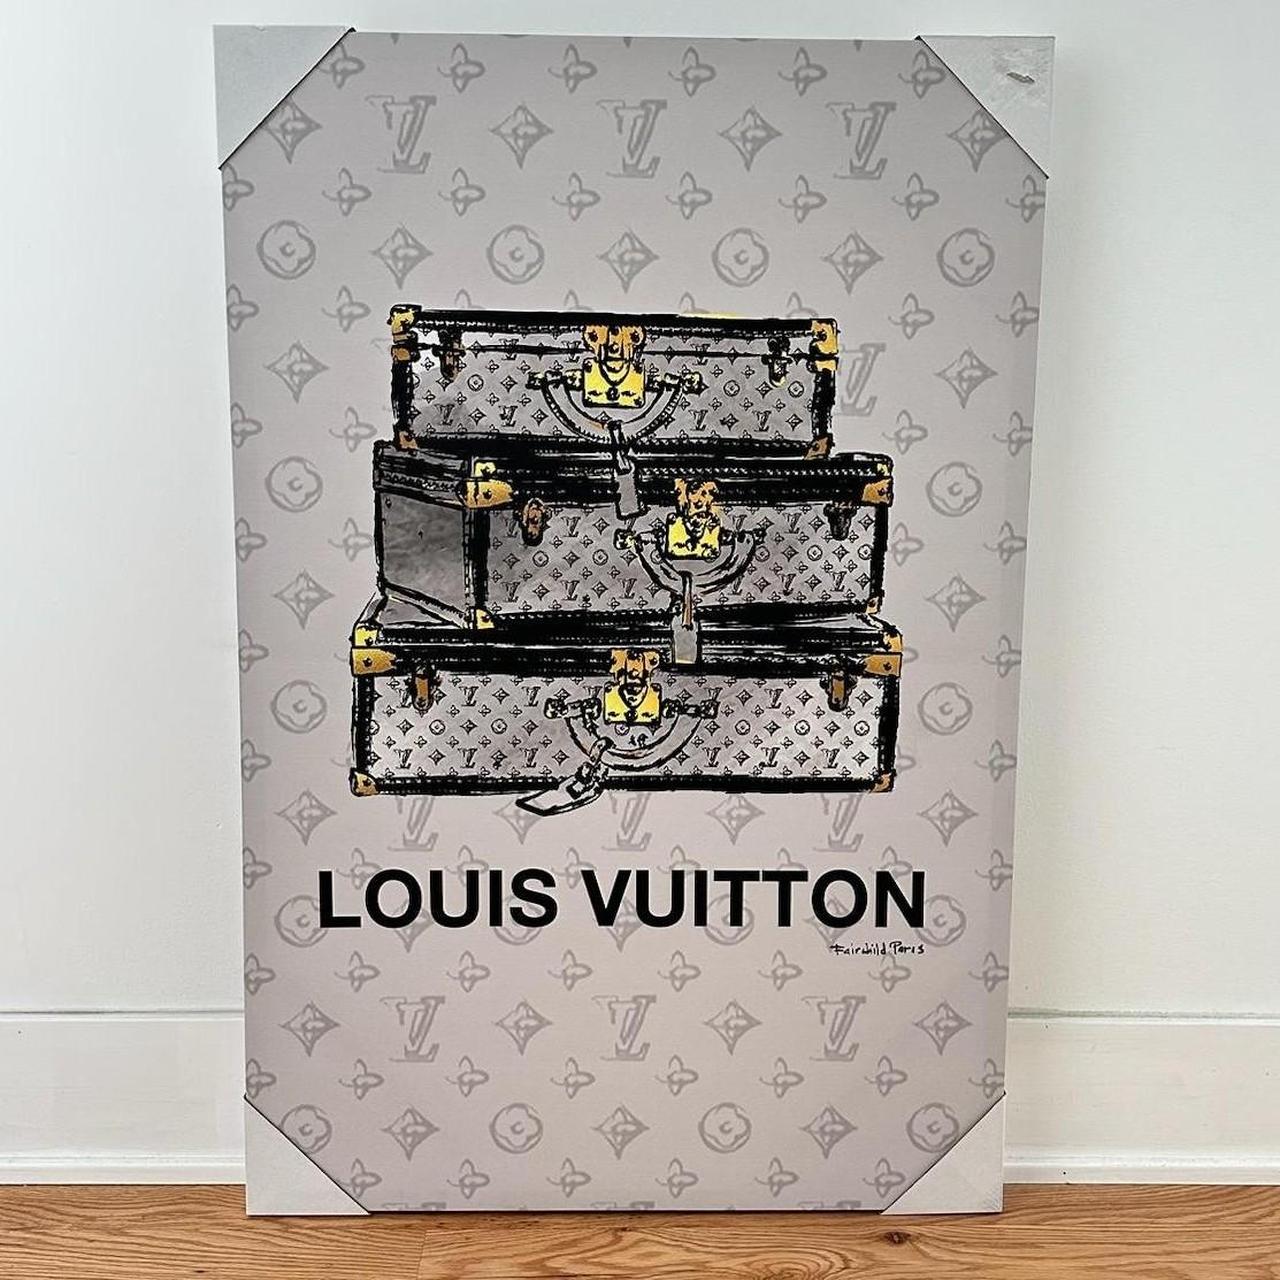 louis vuitton room decor for wall stickers